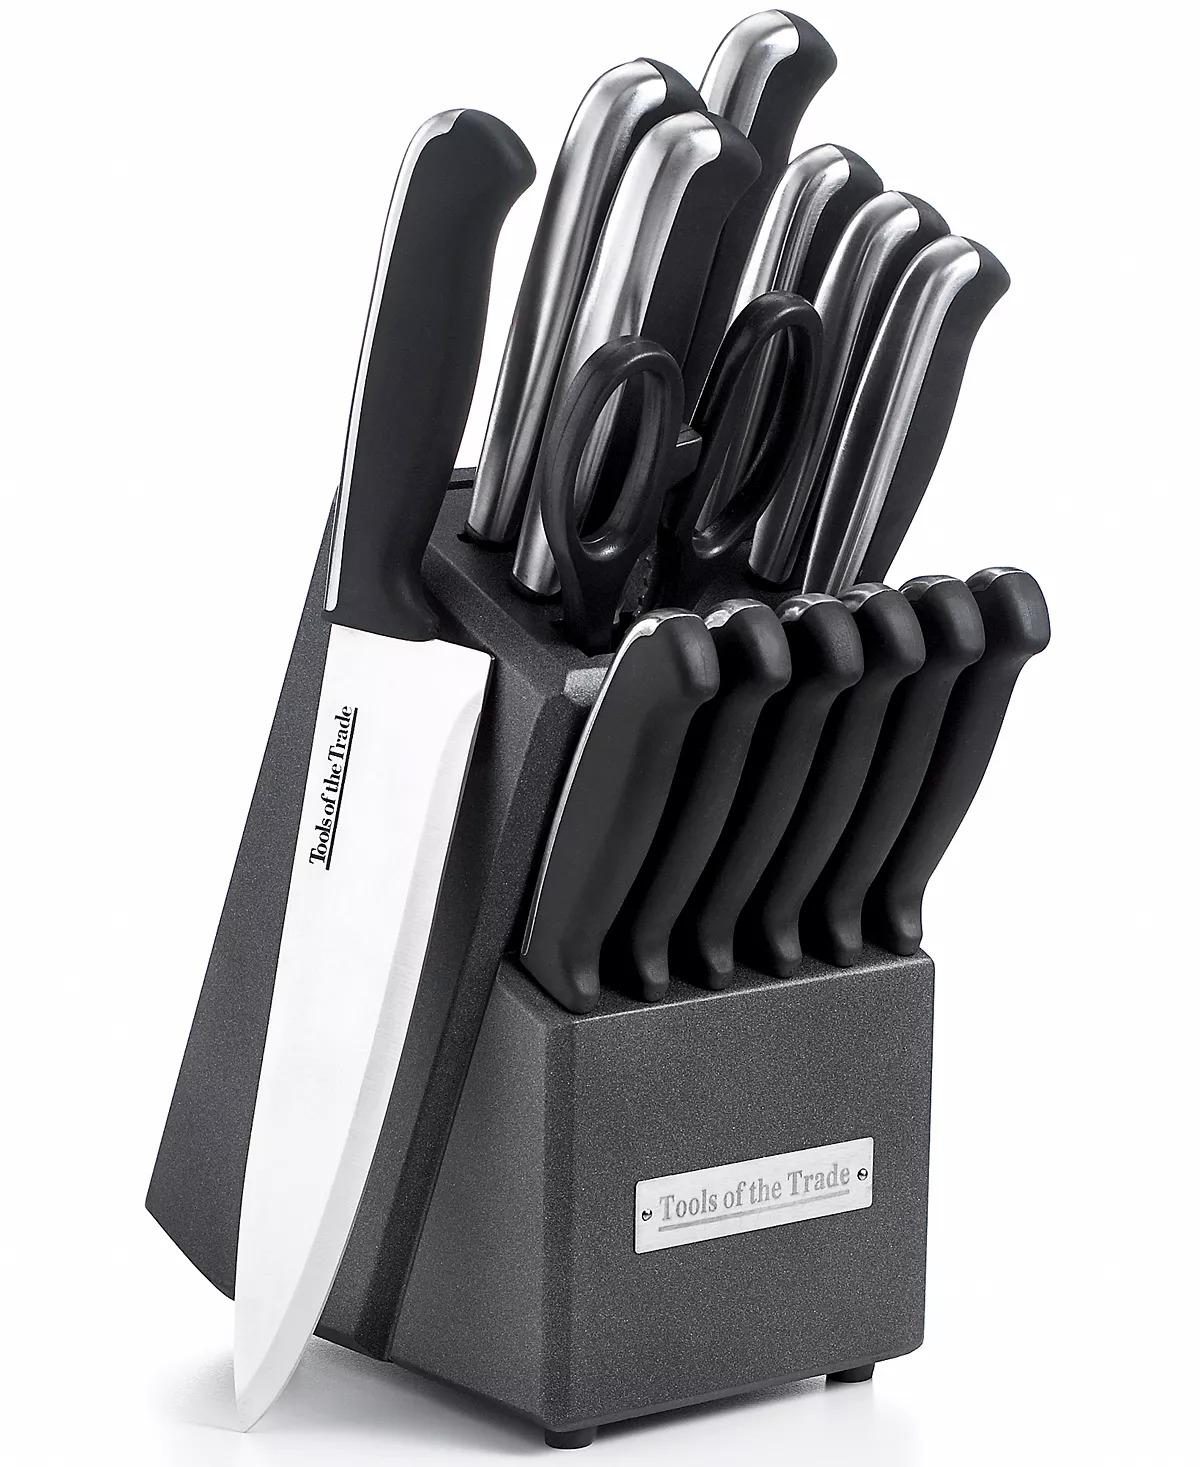 15-Piece Tools of the Trade Cutlery Set w/ Knife Block $18.74 + Free Store Pickup at Macy's or Free Shipping on $25+